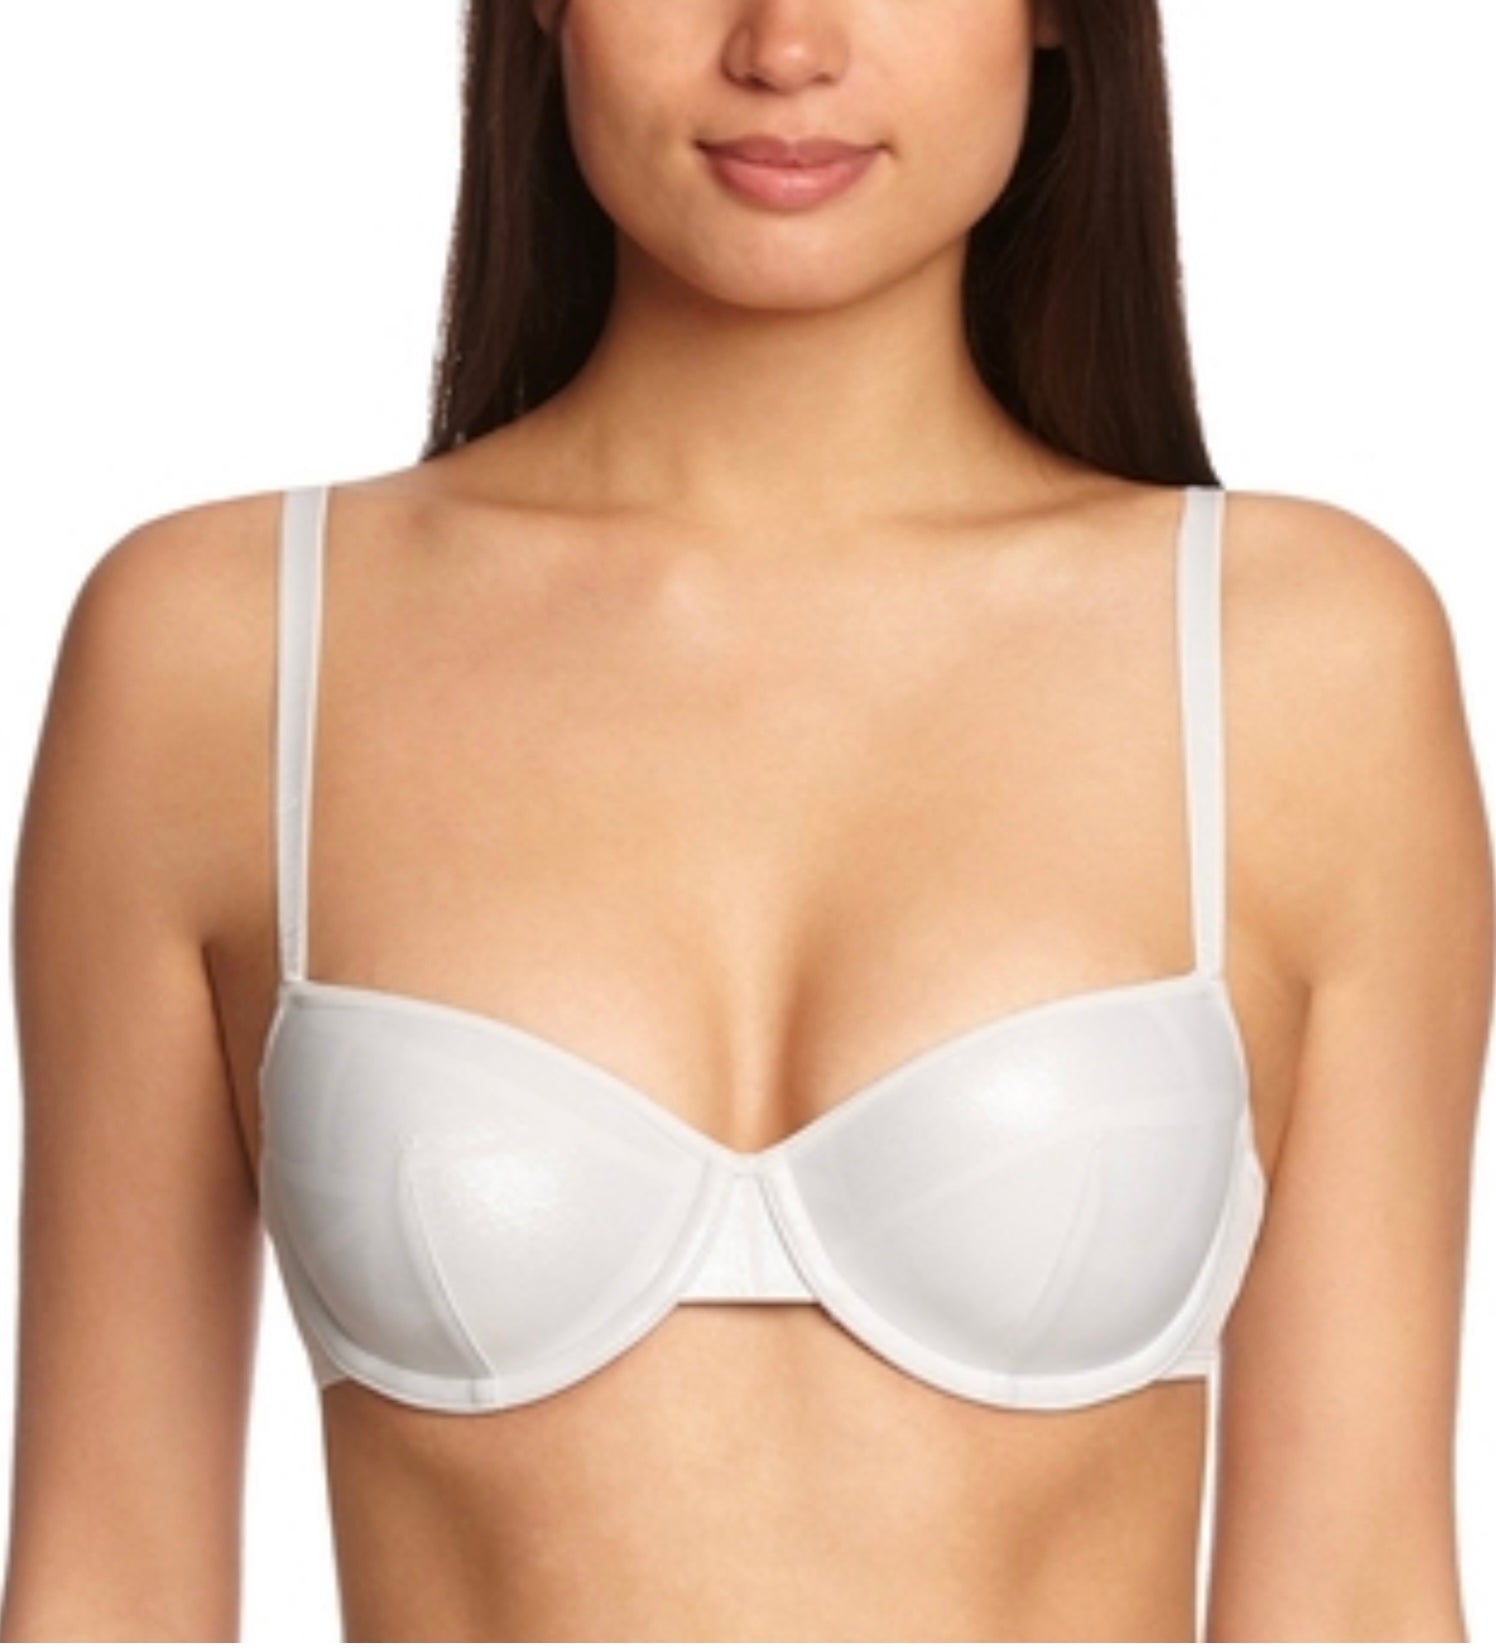 ShimGrey 17067 Molded Bra 36C – The Full Cup